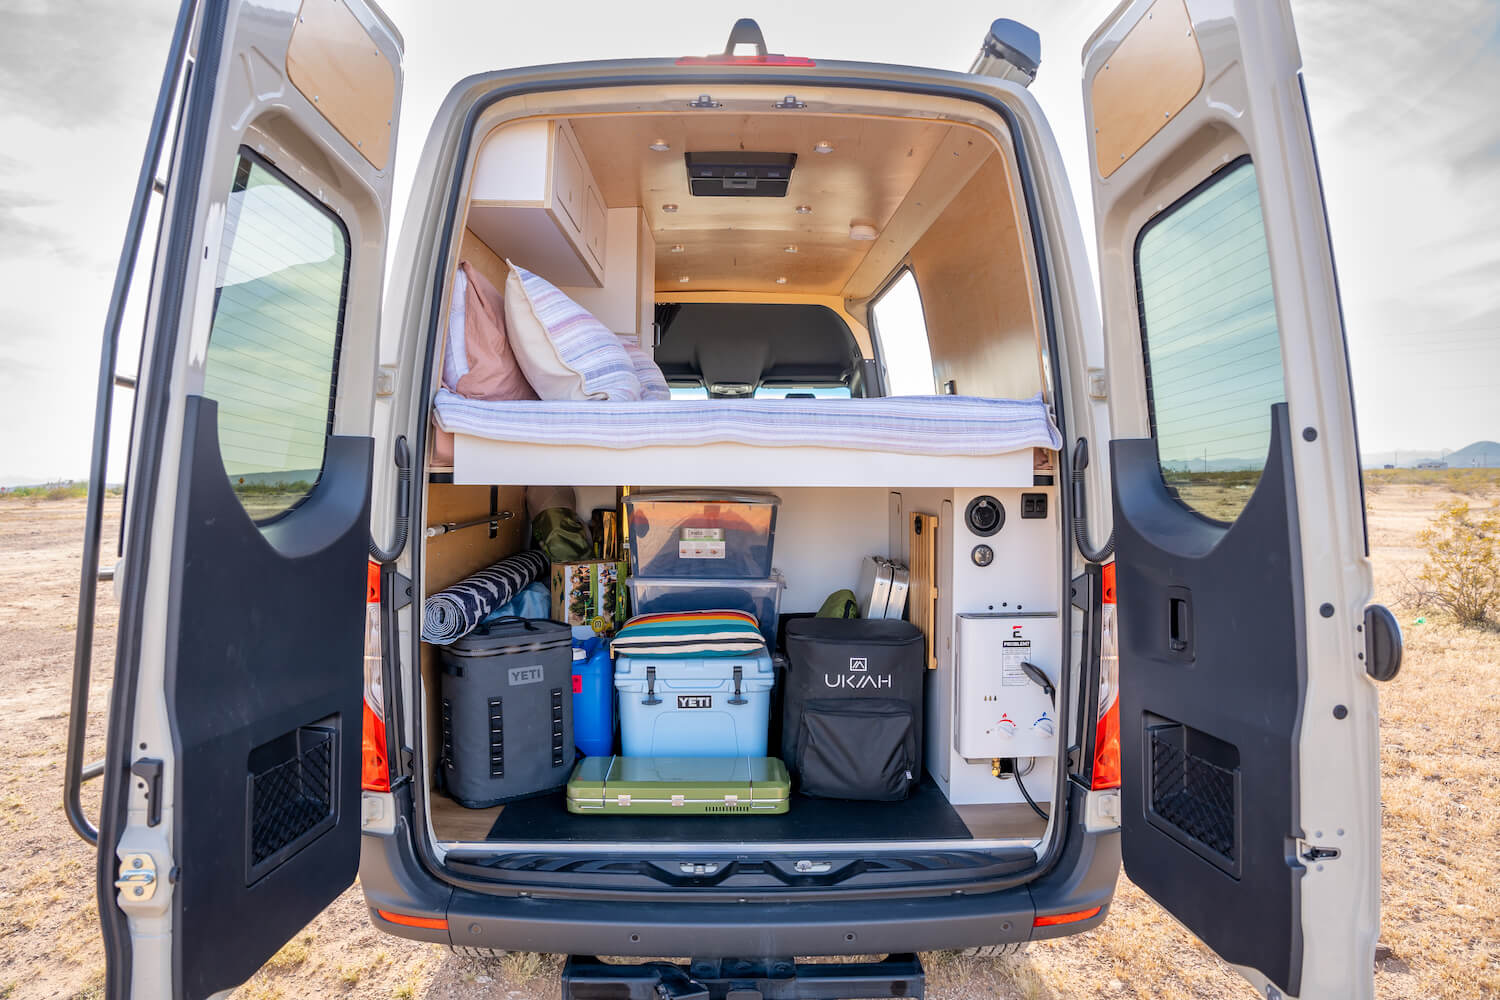 A well-equipped camper van rental ready for a boondocking adventure